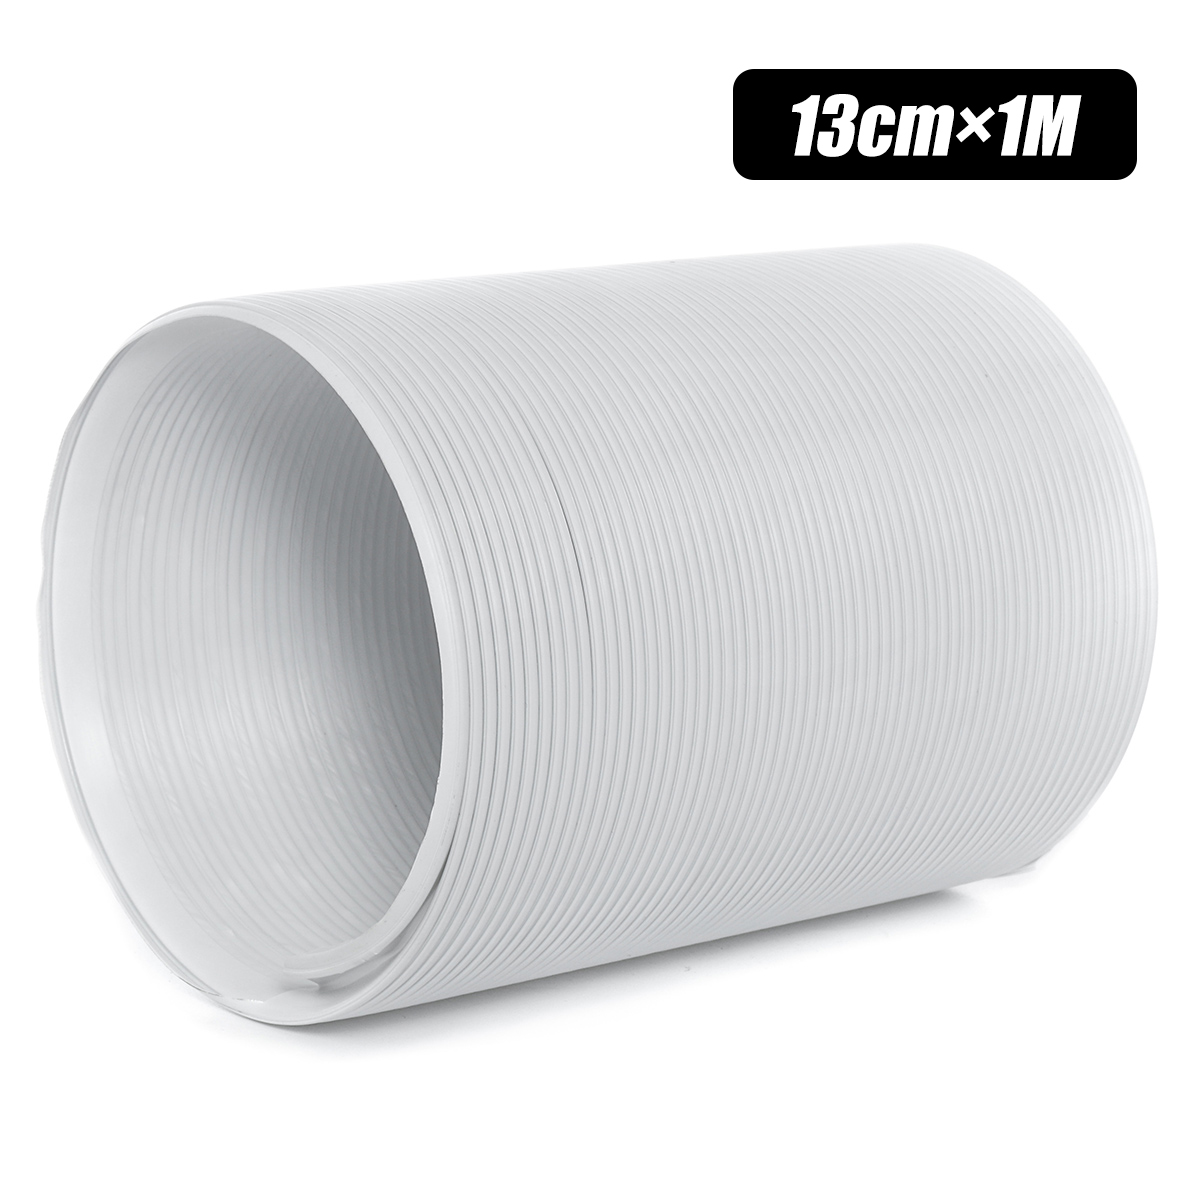 DIA-5-Universal-Pipe-Duct-Air-Conditioner-Exhaust-Hose-For-Range-Hoods-Kitchen-1554659-5